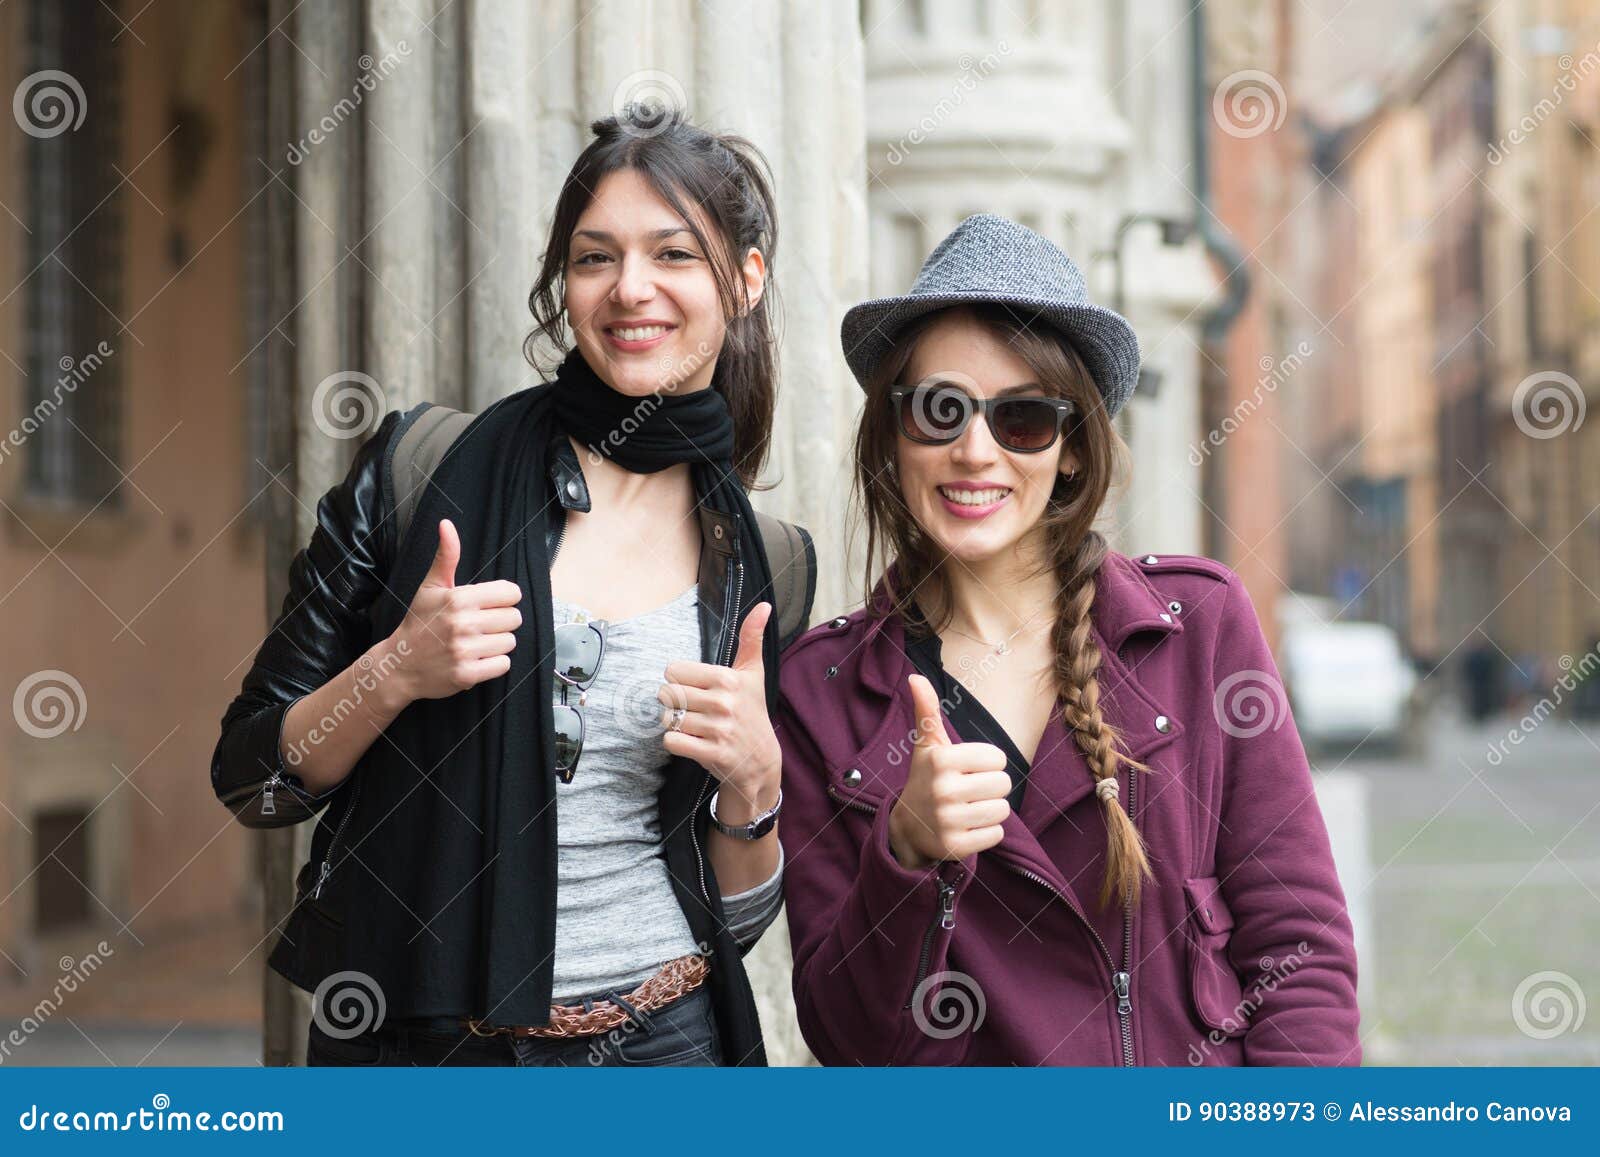 pair of girlfriends on holiday in bologna